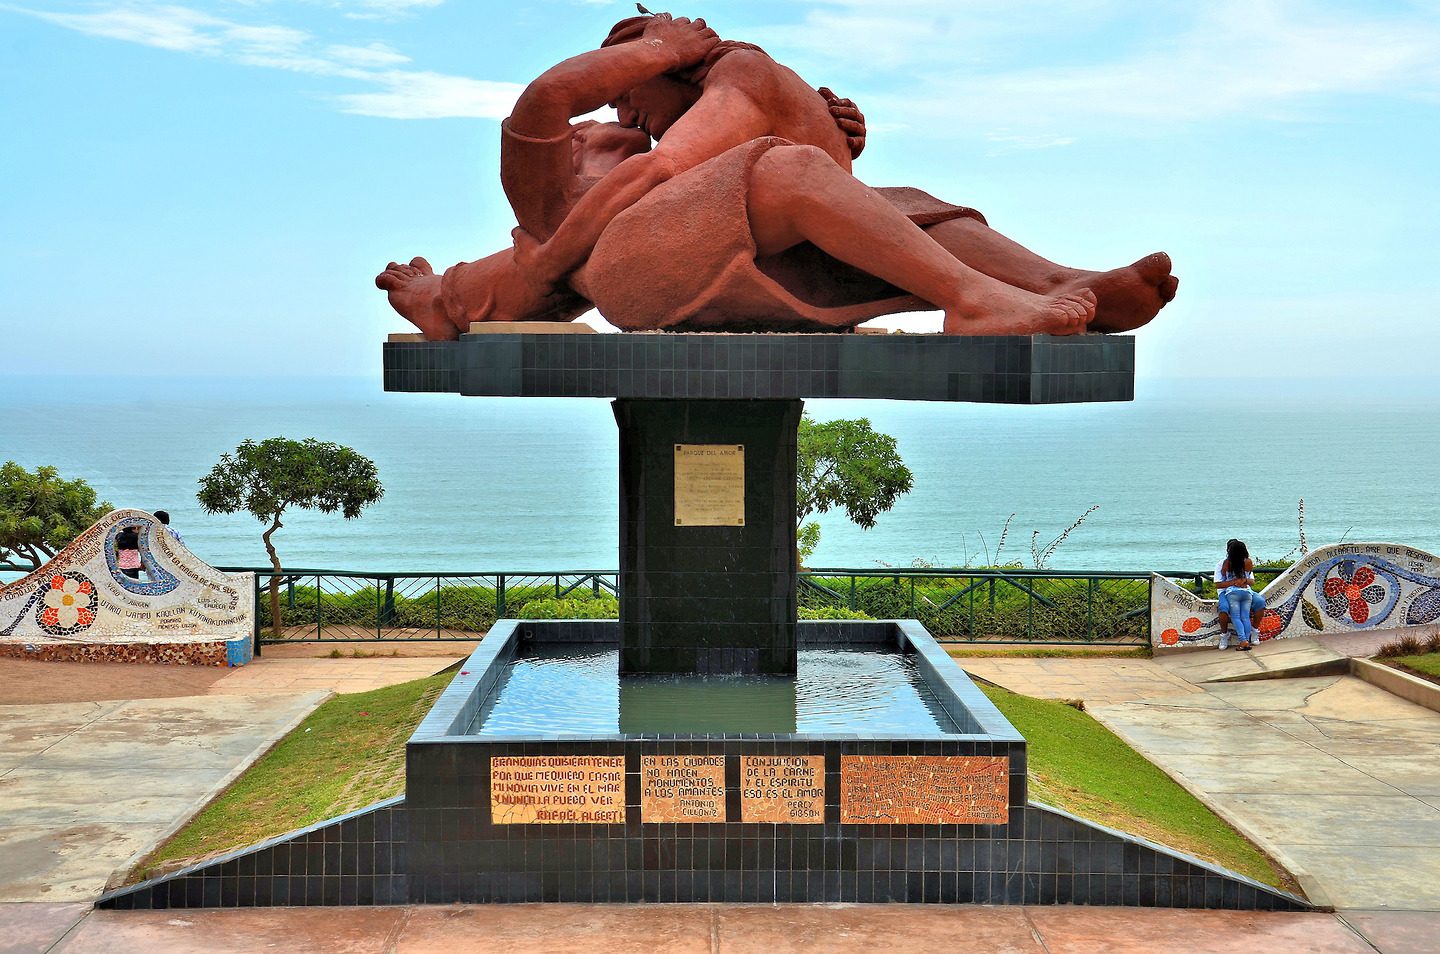 A park with a red romantic statue of a man and woman kissing each other